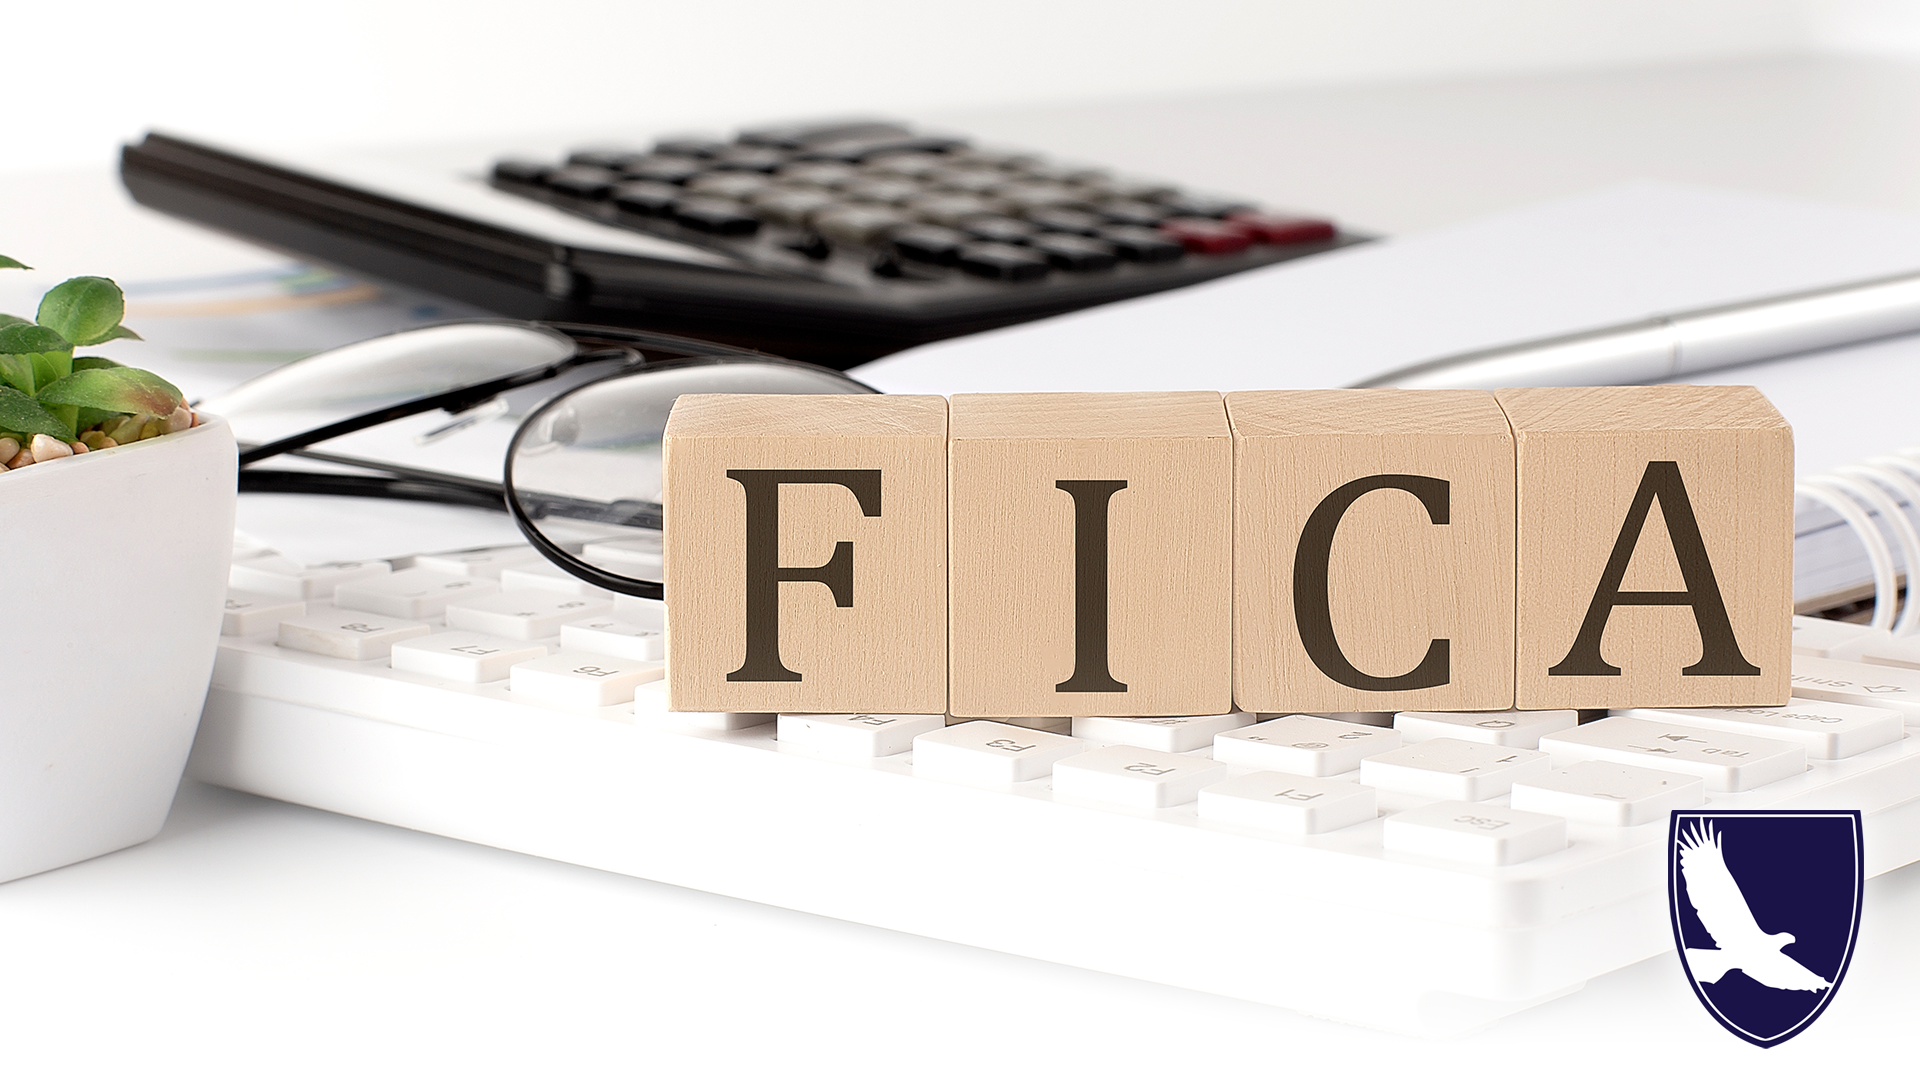 Overview of FICA Tax- Medicare & Social Security